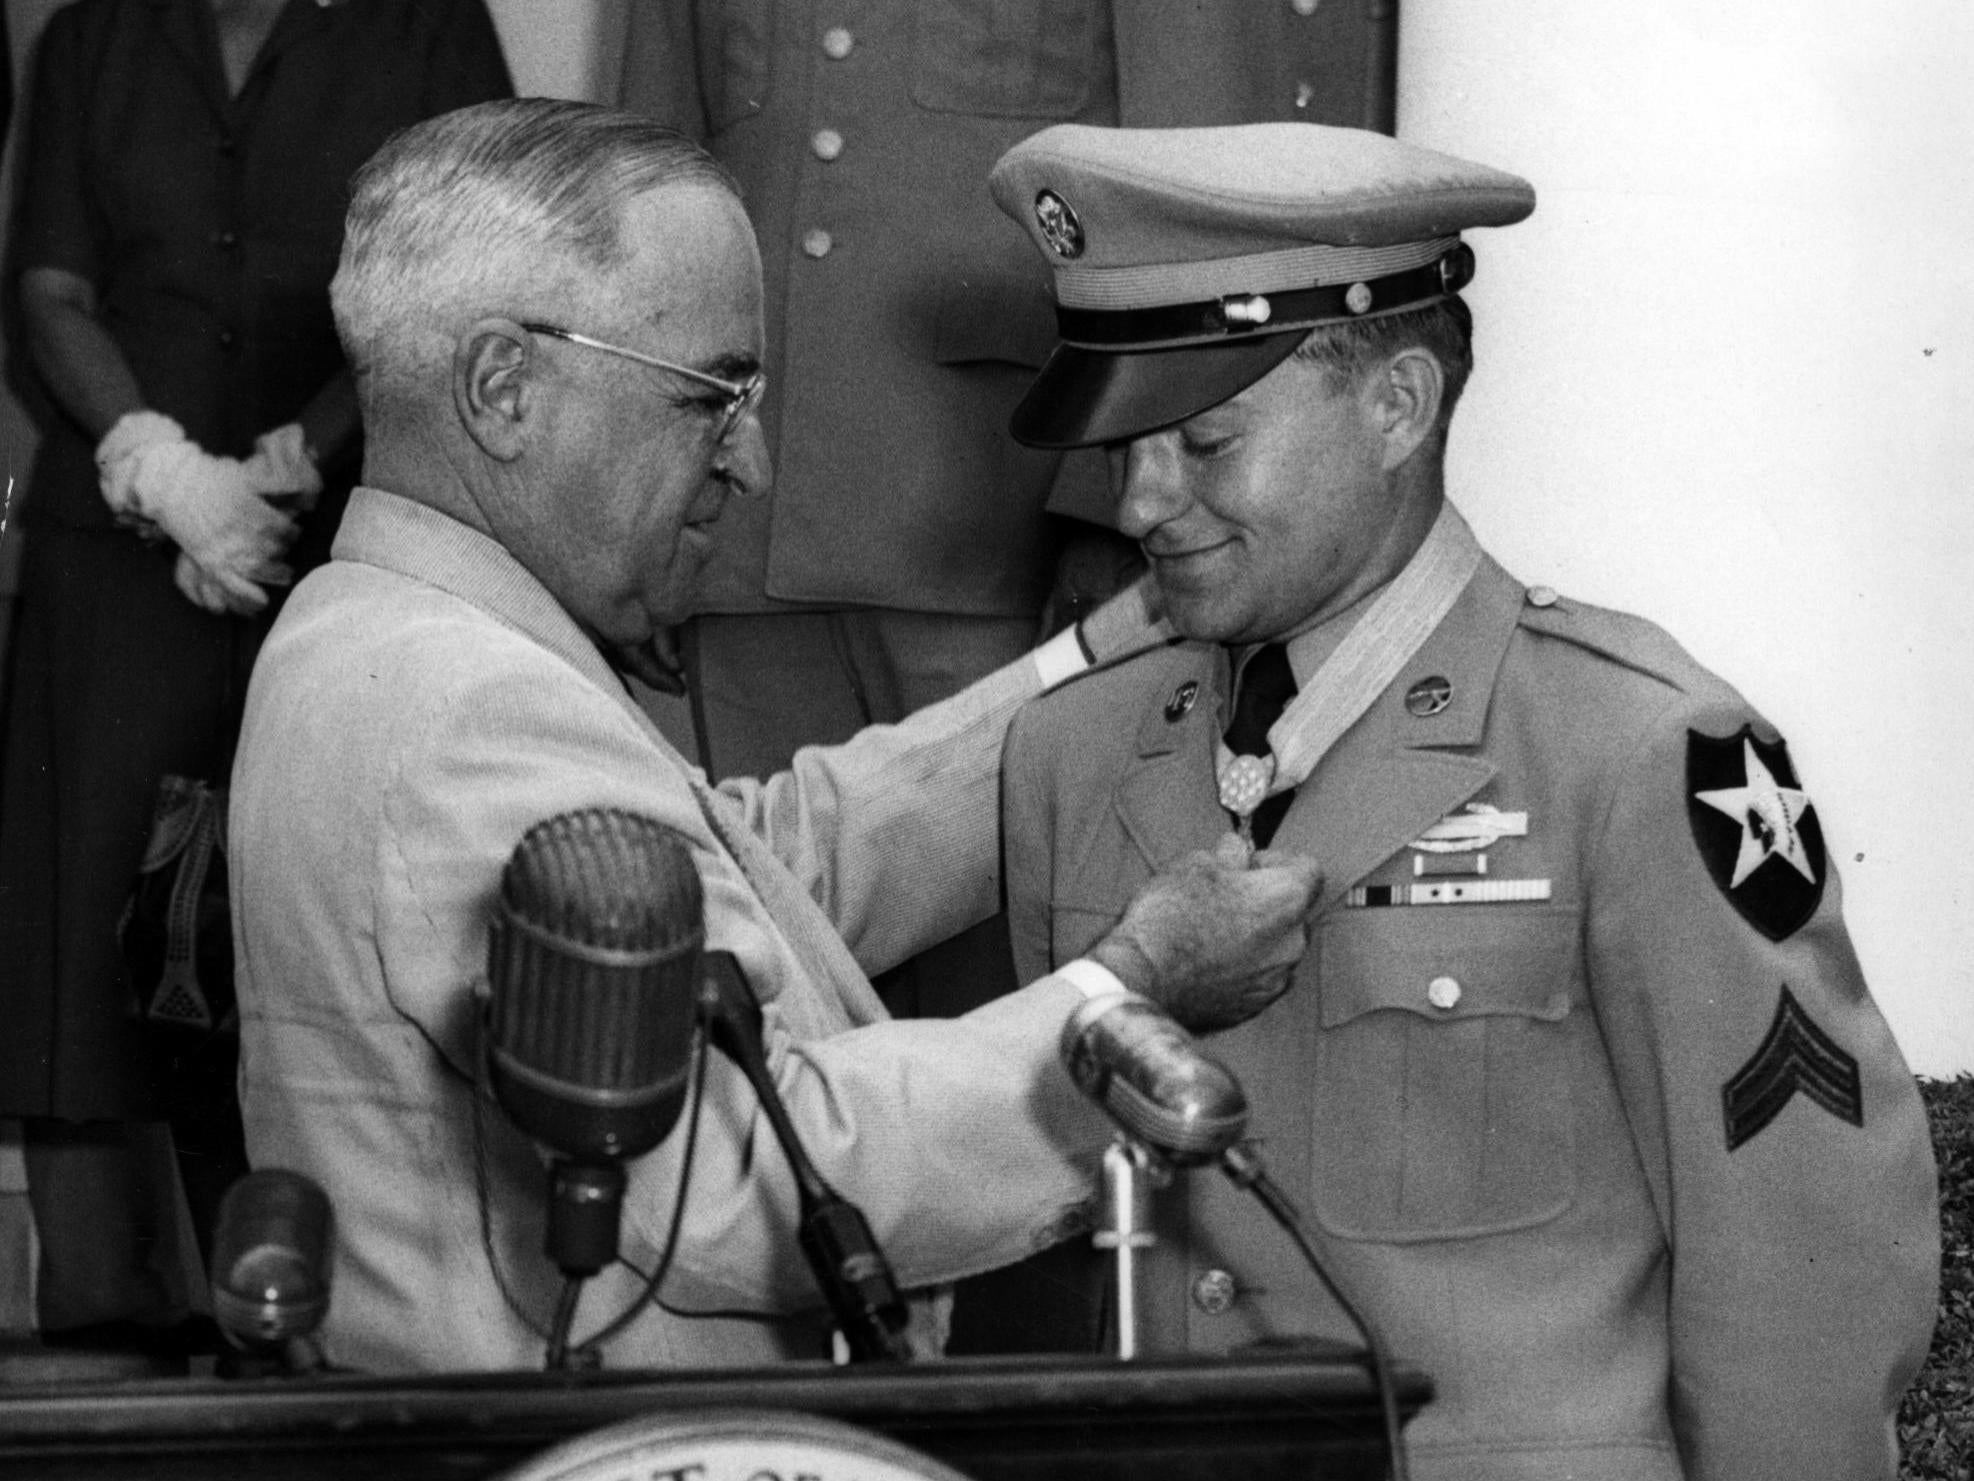 President Harry S Truman presents the Medal of Honor to Rosser at the White House in 1952